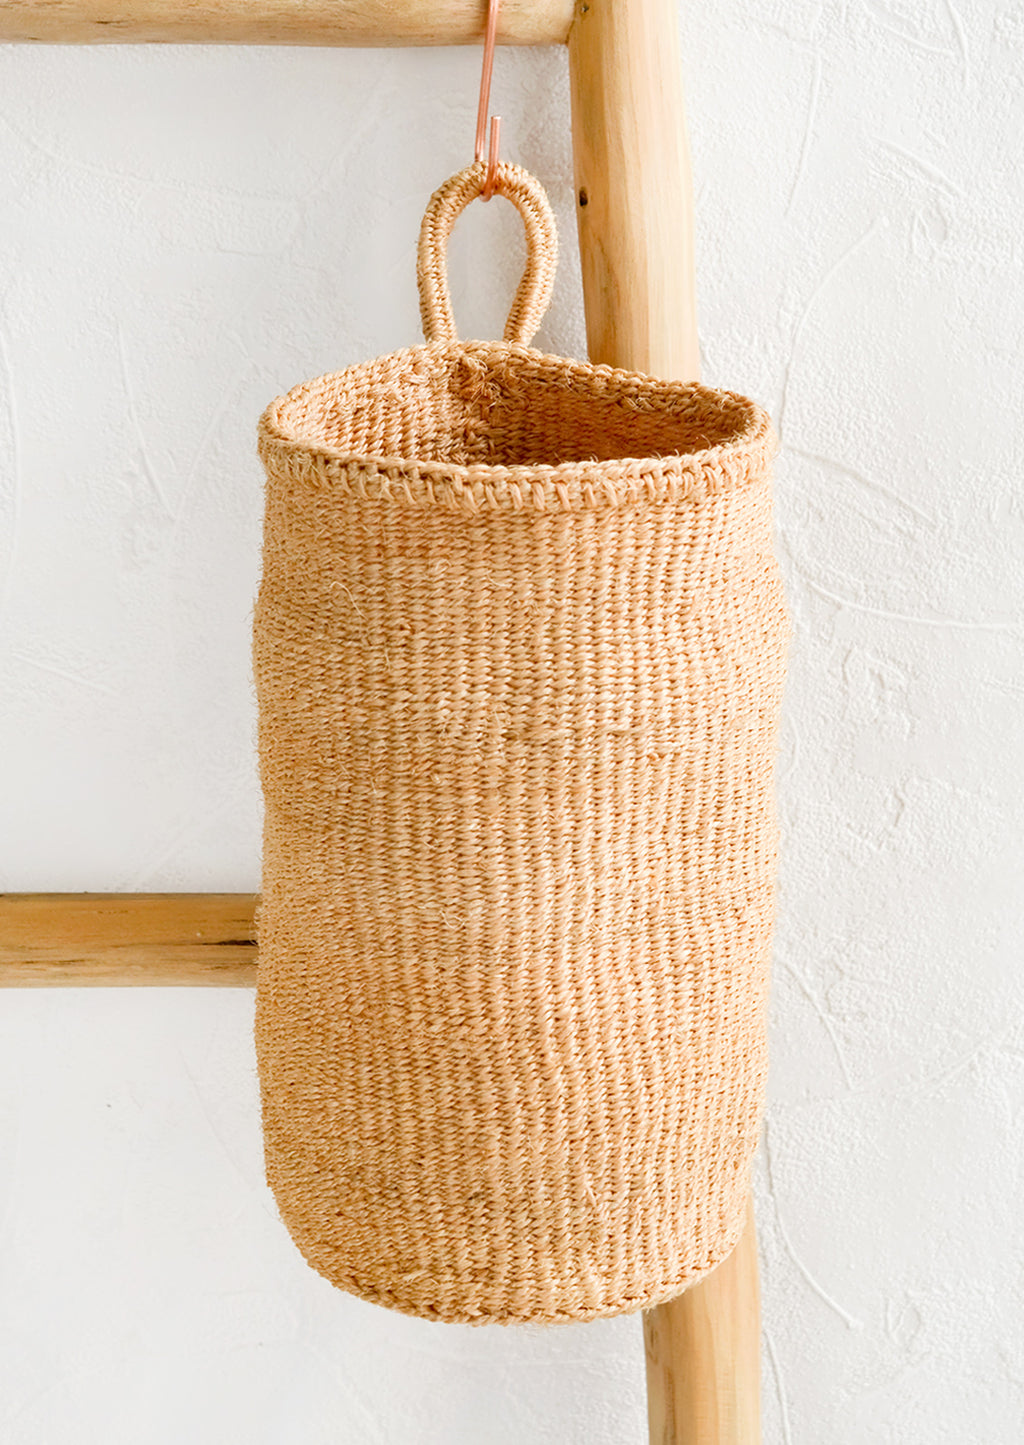 Natural: An oblong cylindrical basket woven from sisal in natural color.